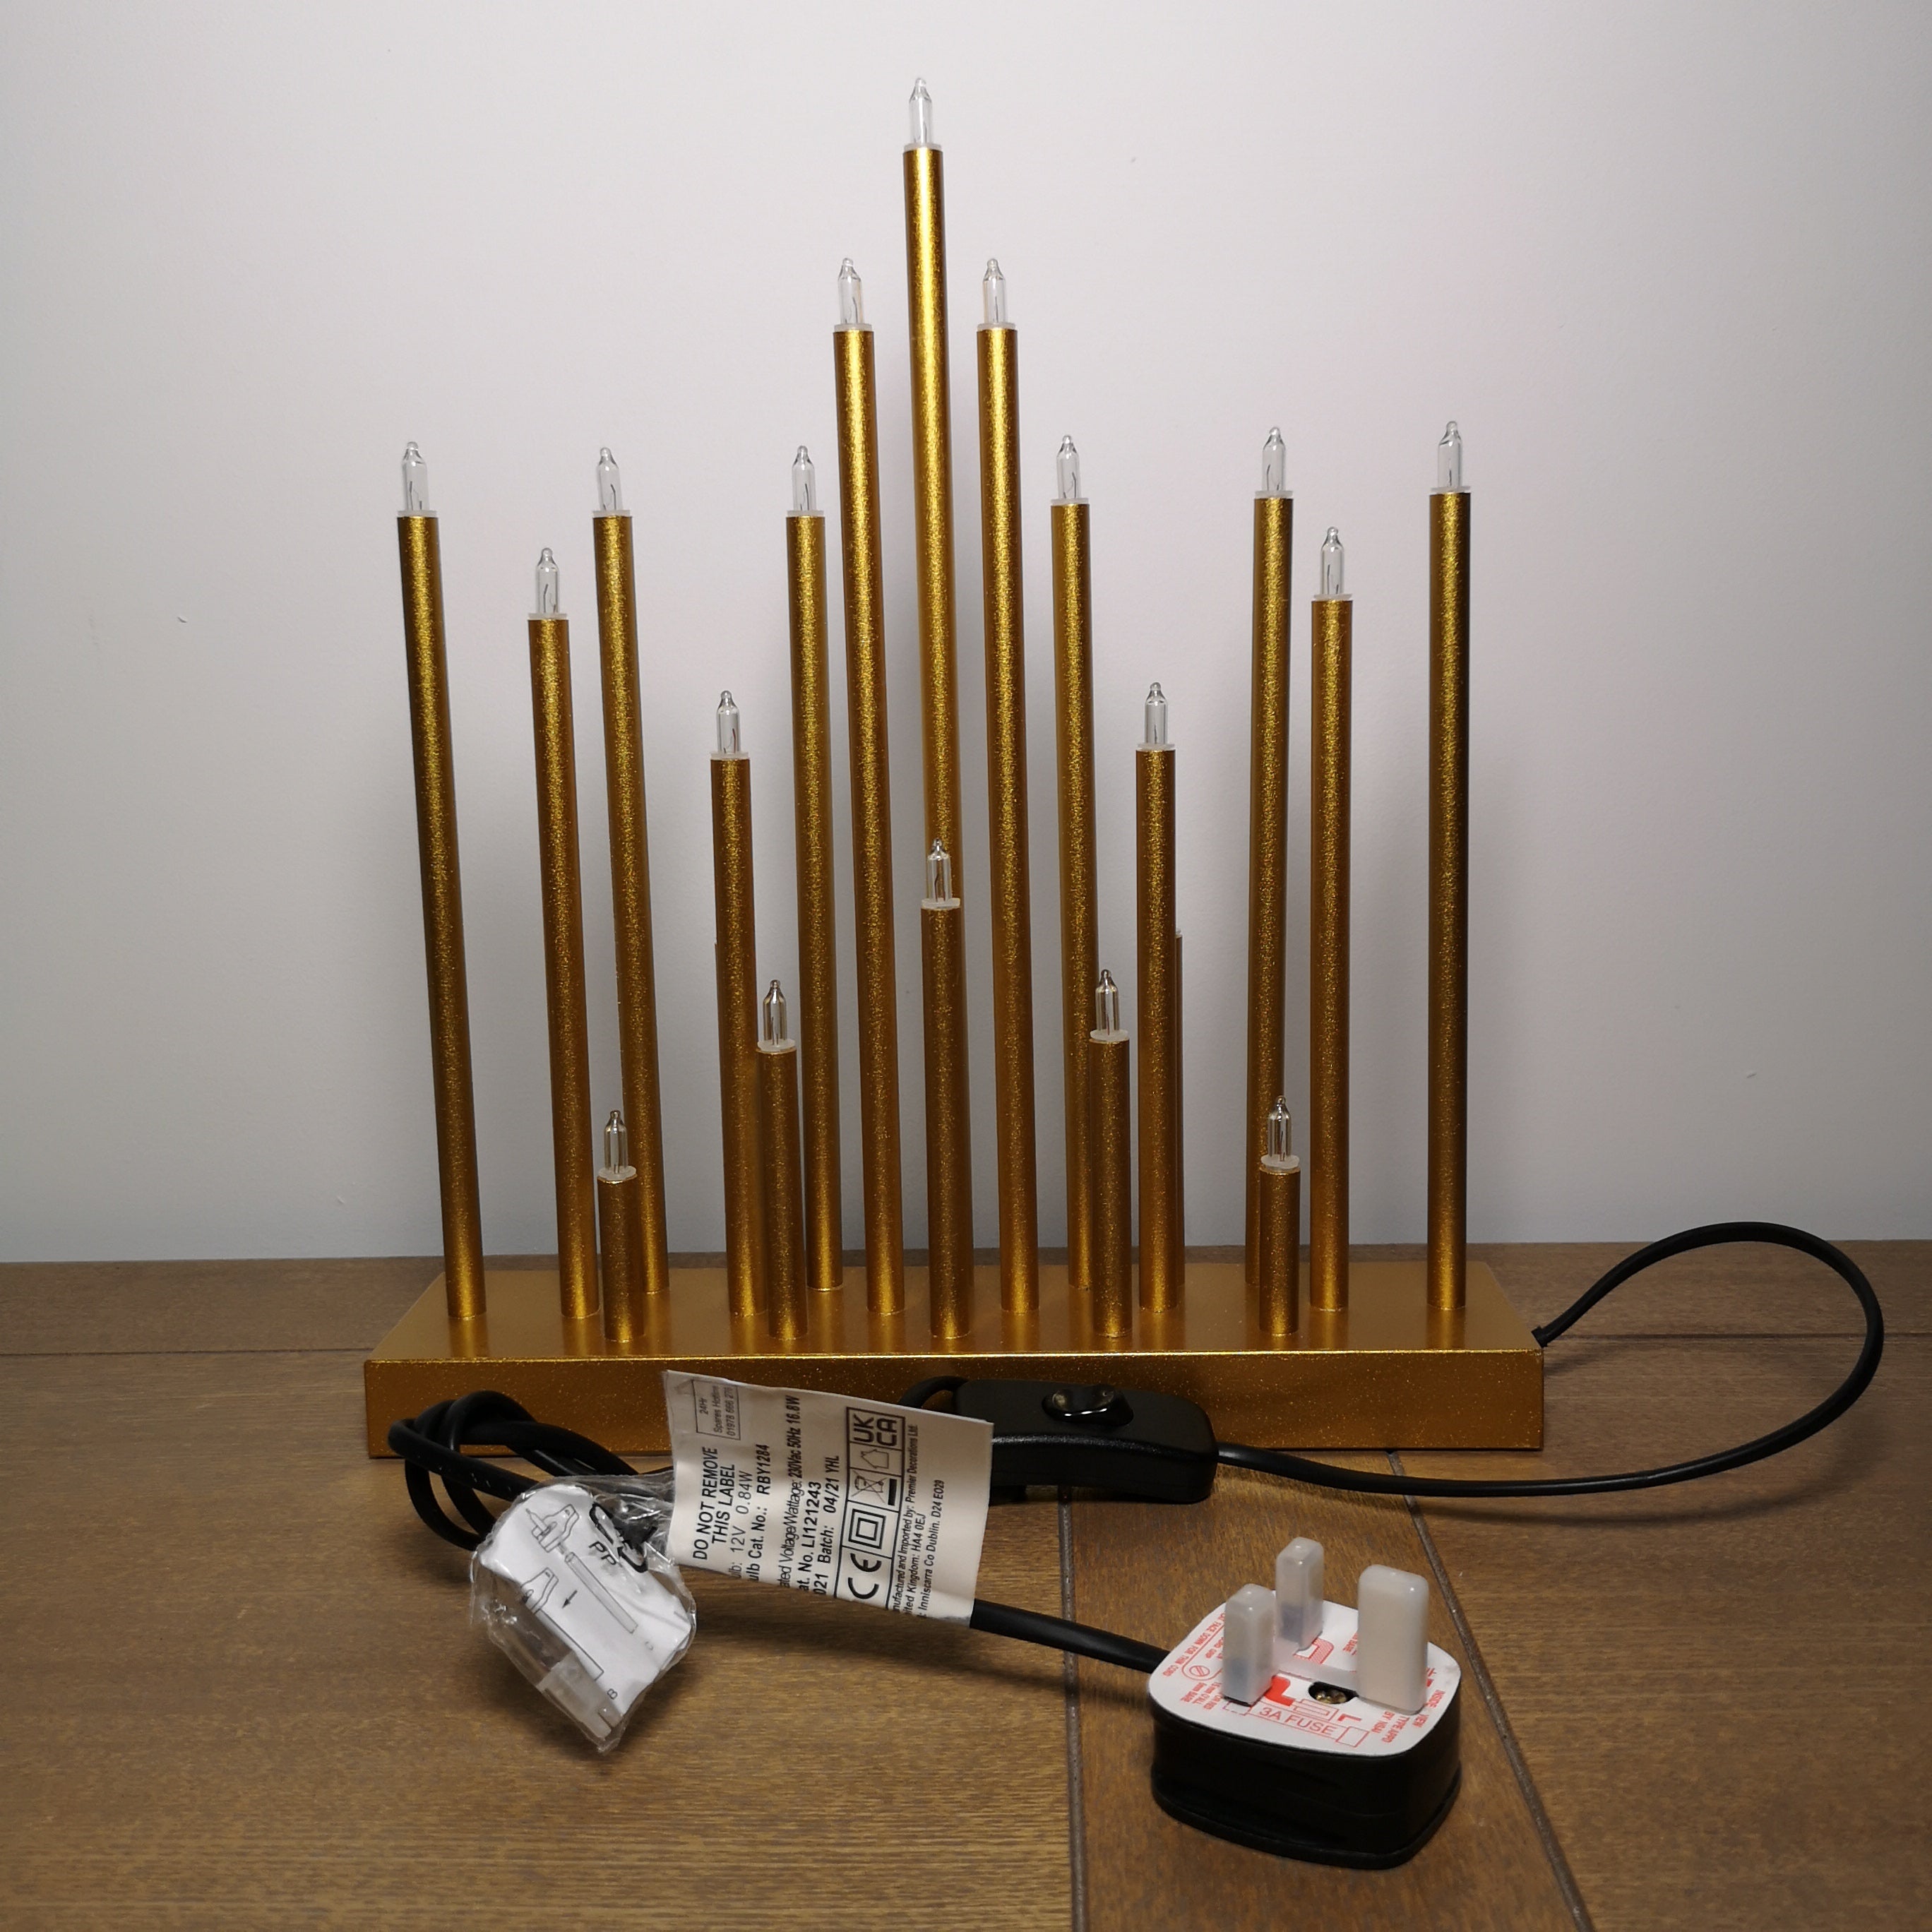 33cm Premier Christmas Candle Bridge Star Shaped with 20 LEDs In Gold Mains Power